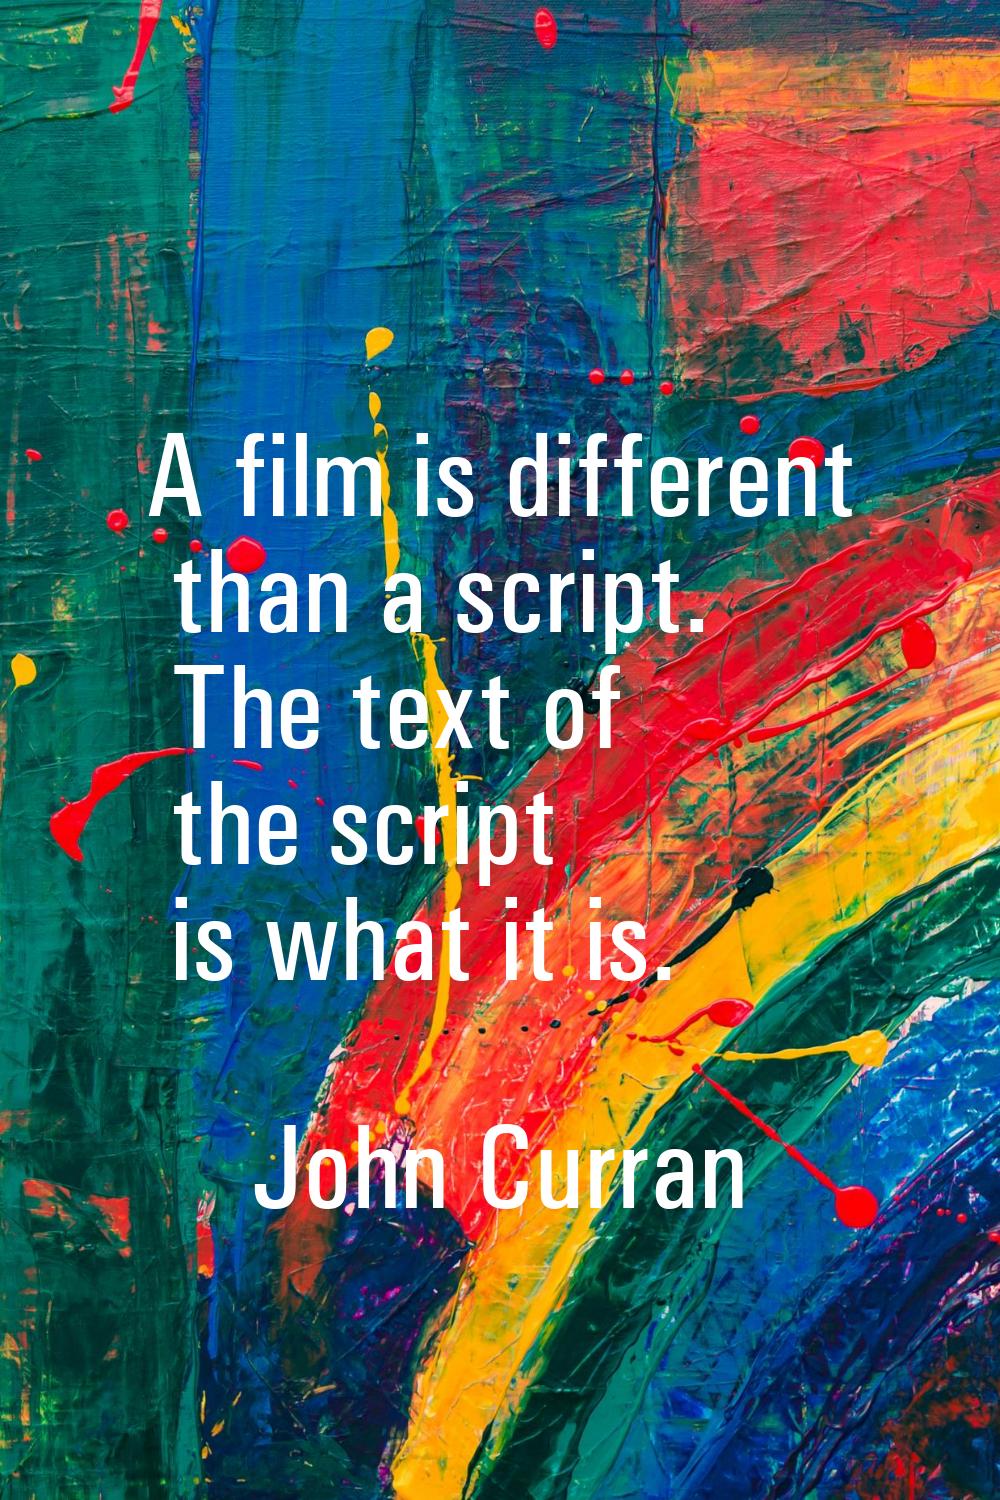 A film is different than a script. The text of the script is what it is.